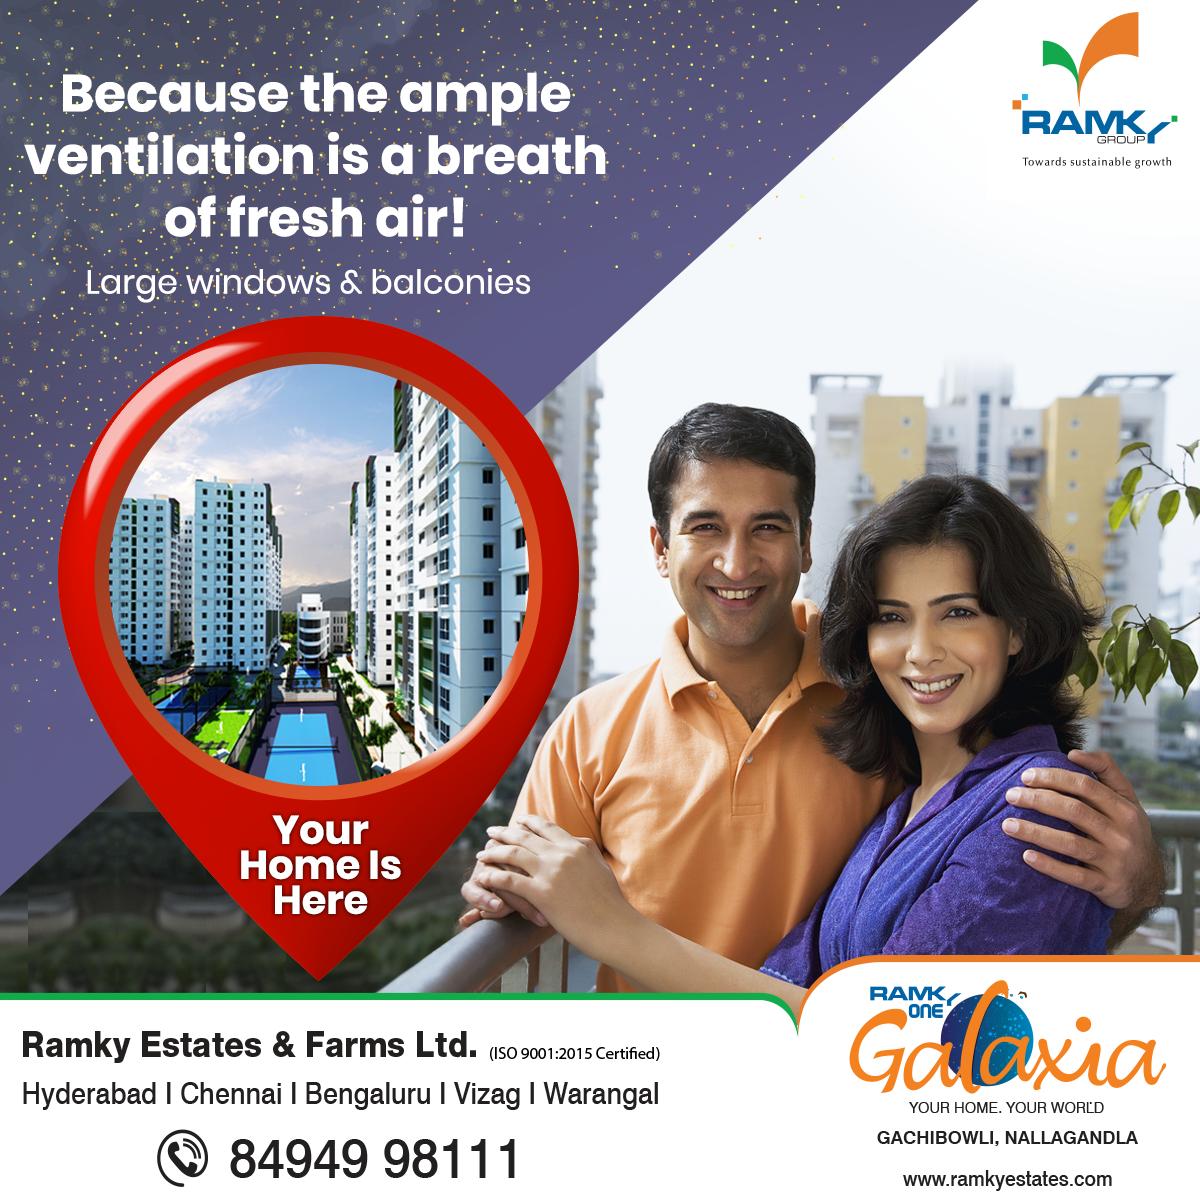 The #3BHK 1860 sq. ft. corner #apartments starting @ Rs. 1.11 crore at #RamkyOneGalaxia in #Gachibowli Nallagandla in #Hyderabad feature large windows & spacious balconies that welcome in ample fresh air & sunlight. #YourHomeIsHere

Book your #apartment
bit.ly/2Cgc49l